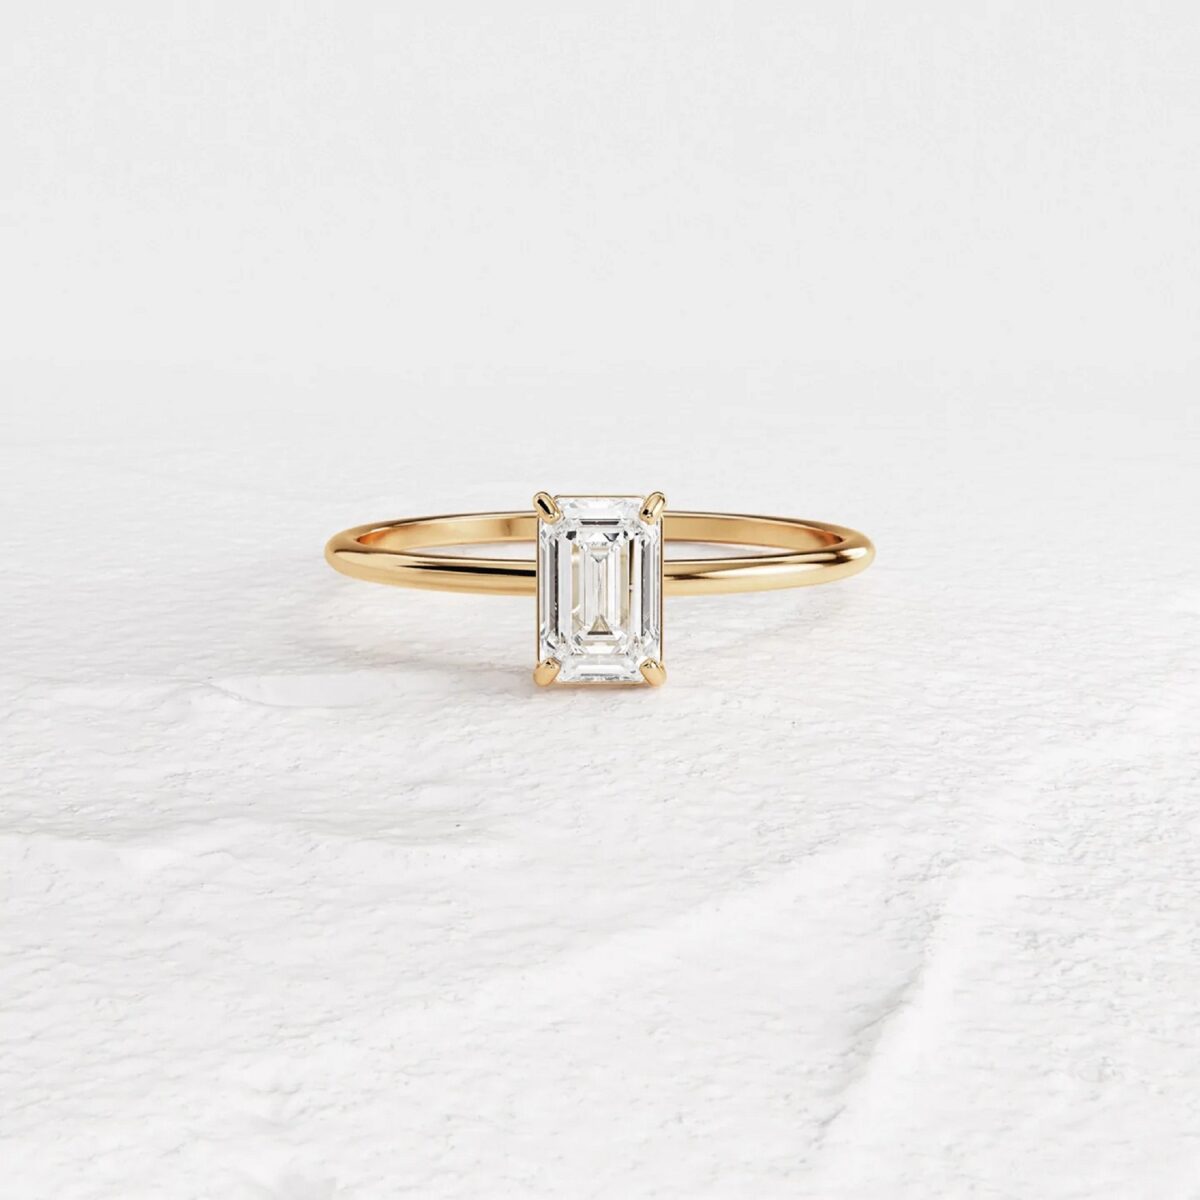 Classic emerald cut lab grown diamond solitaire ring crafted in 14k yellow gold.